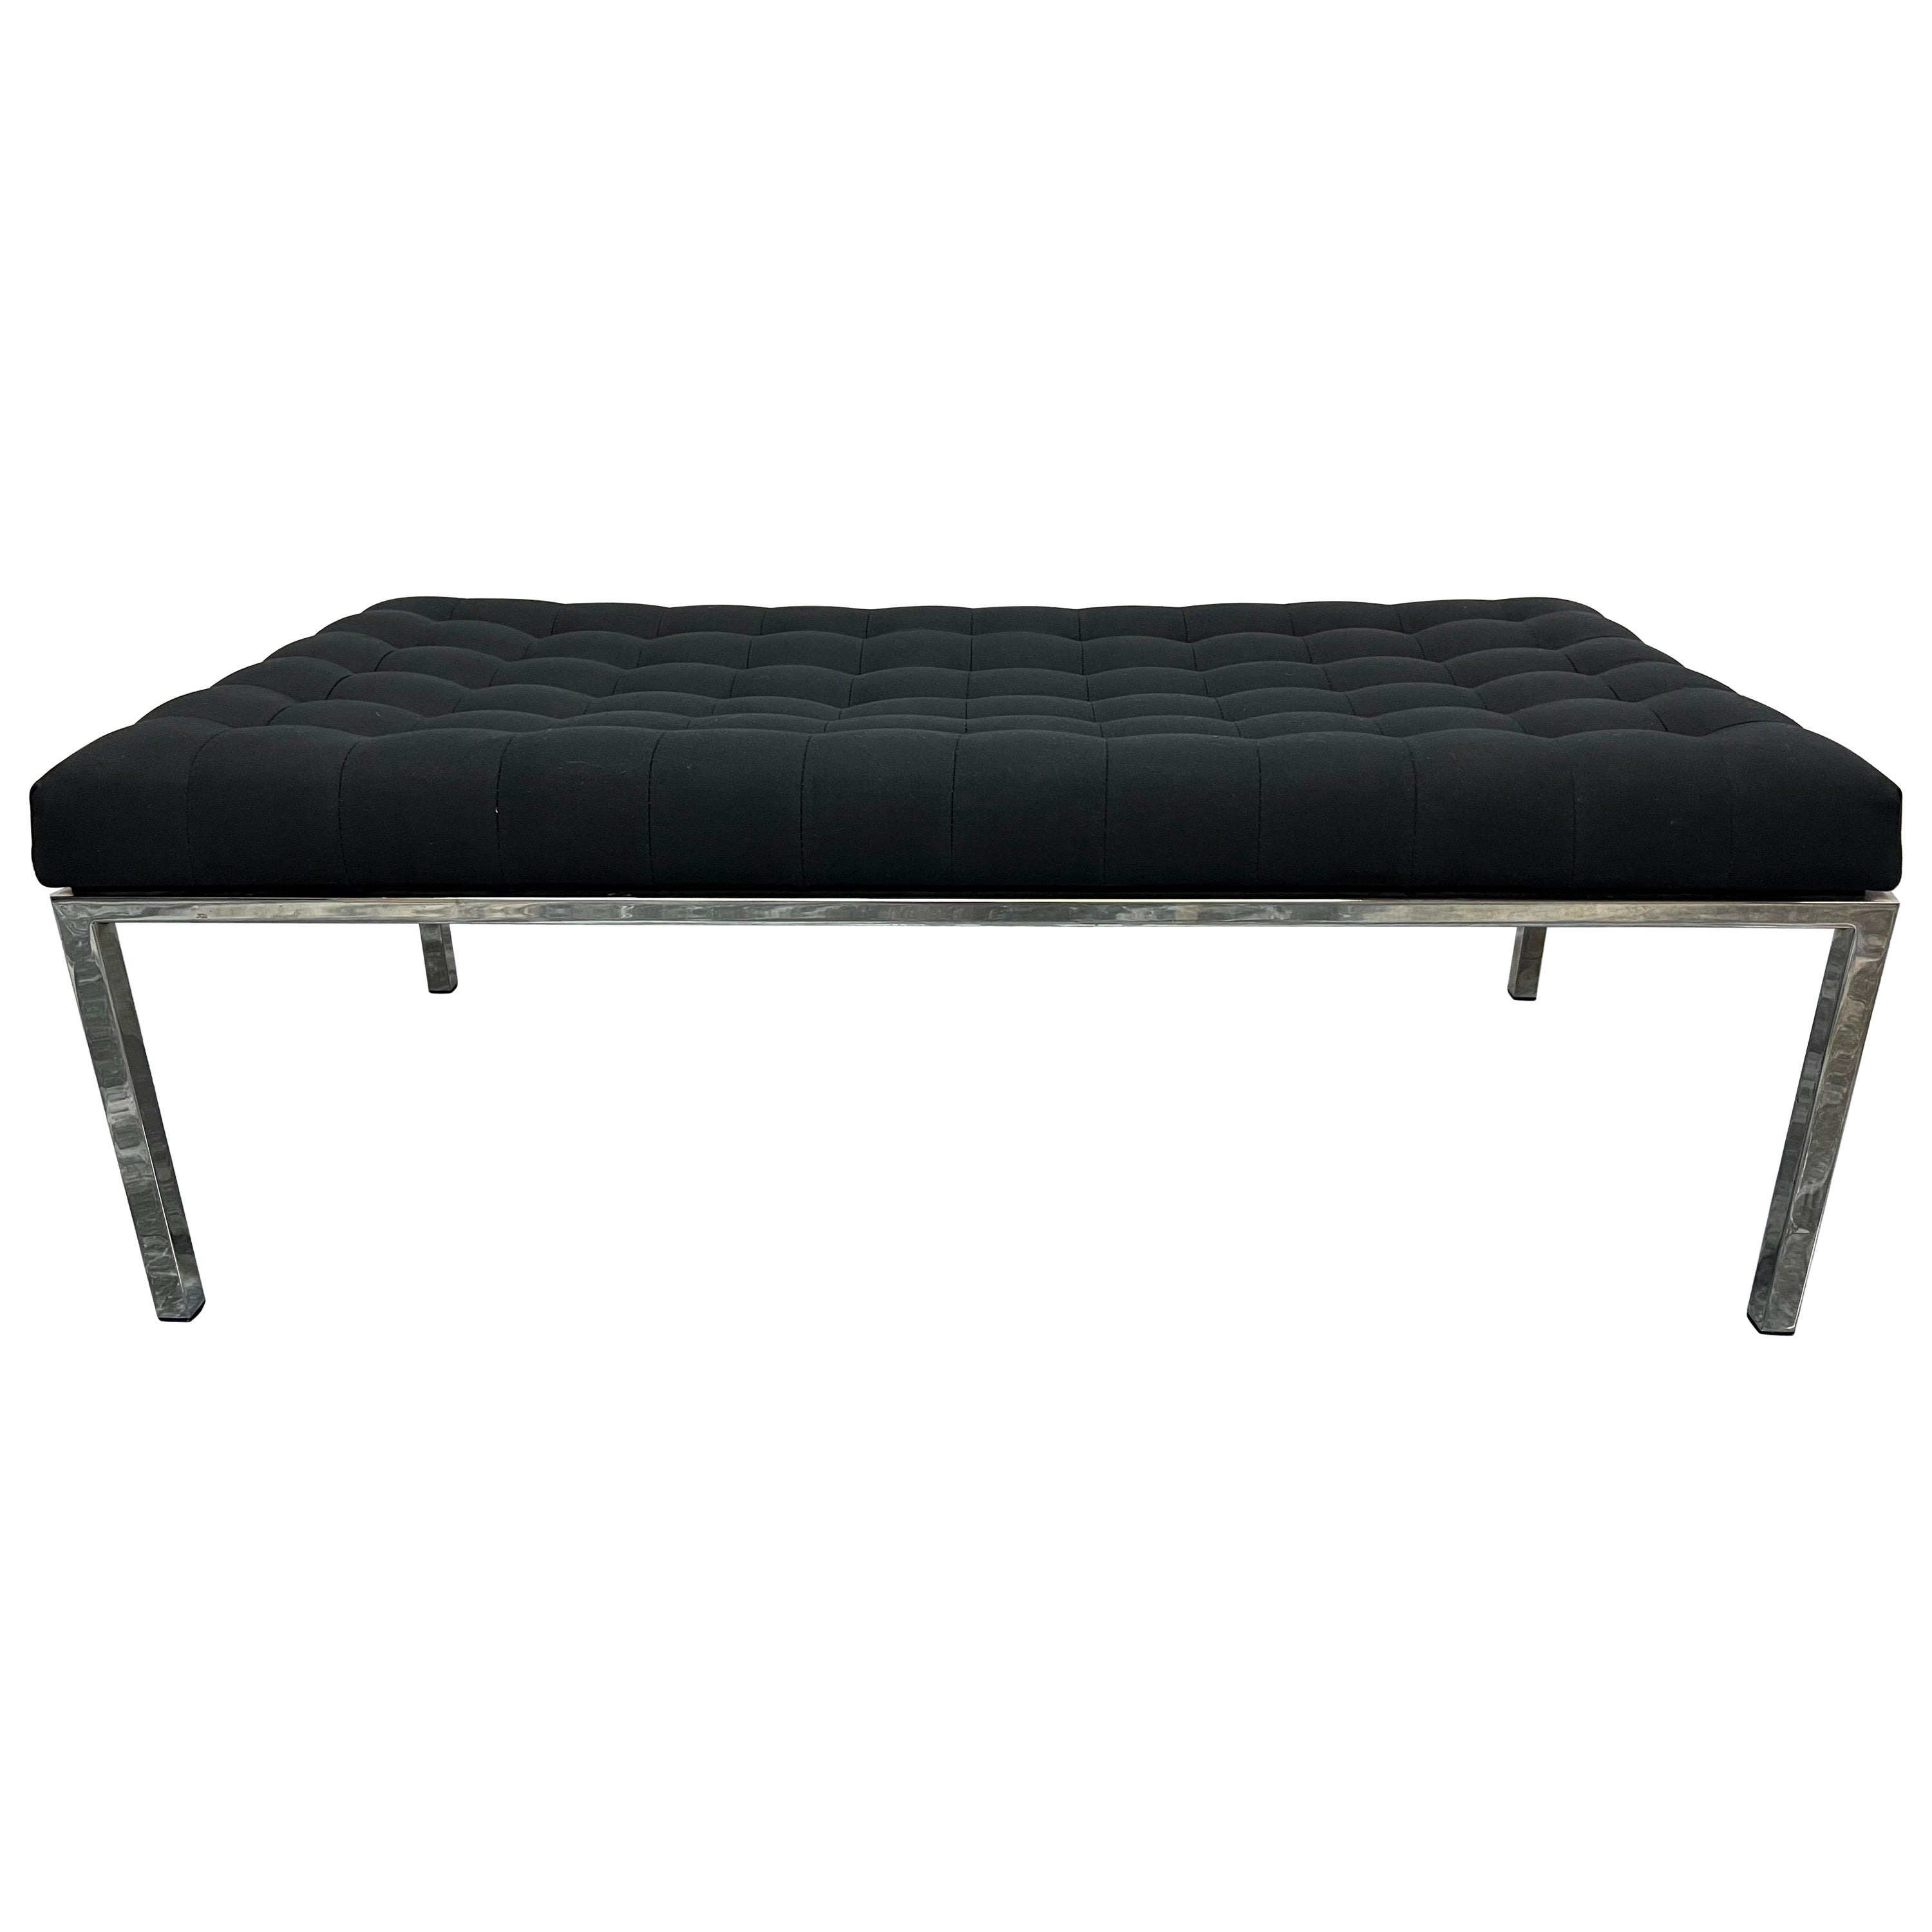 Black Tufted Canvas Museum Bench by Metropolitan Furniture, 1986